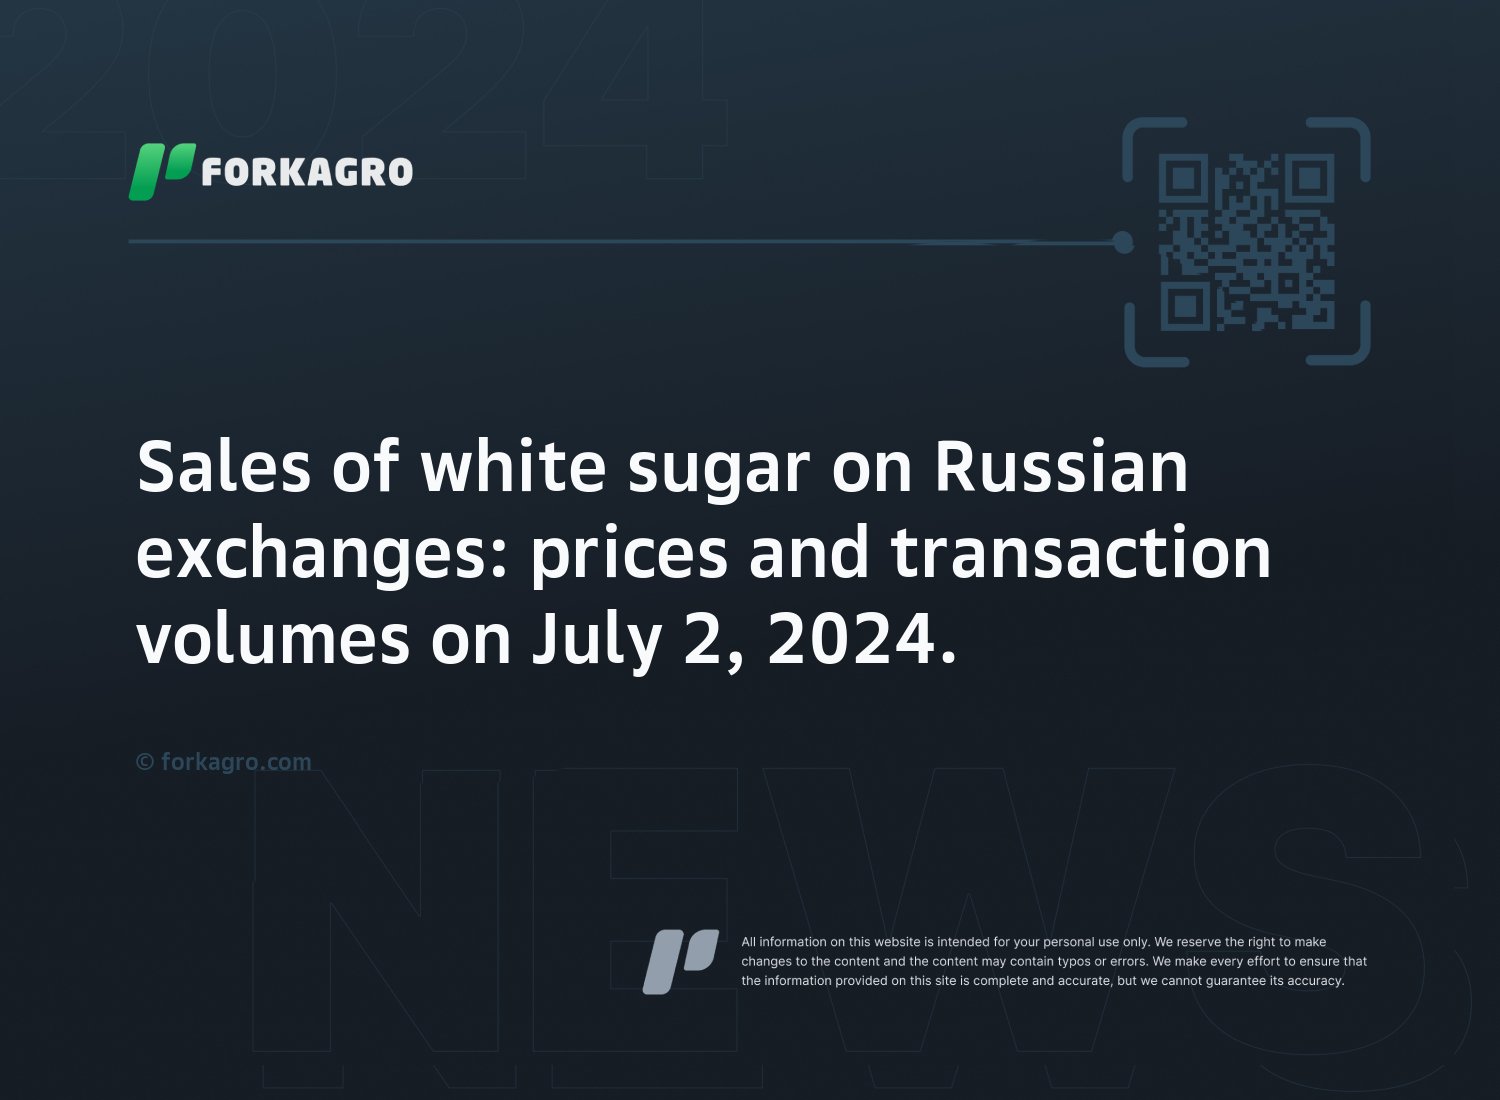 Sales of white sugar on Russian exchanges: prices and transaction volumes on July 2, 2024.